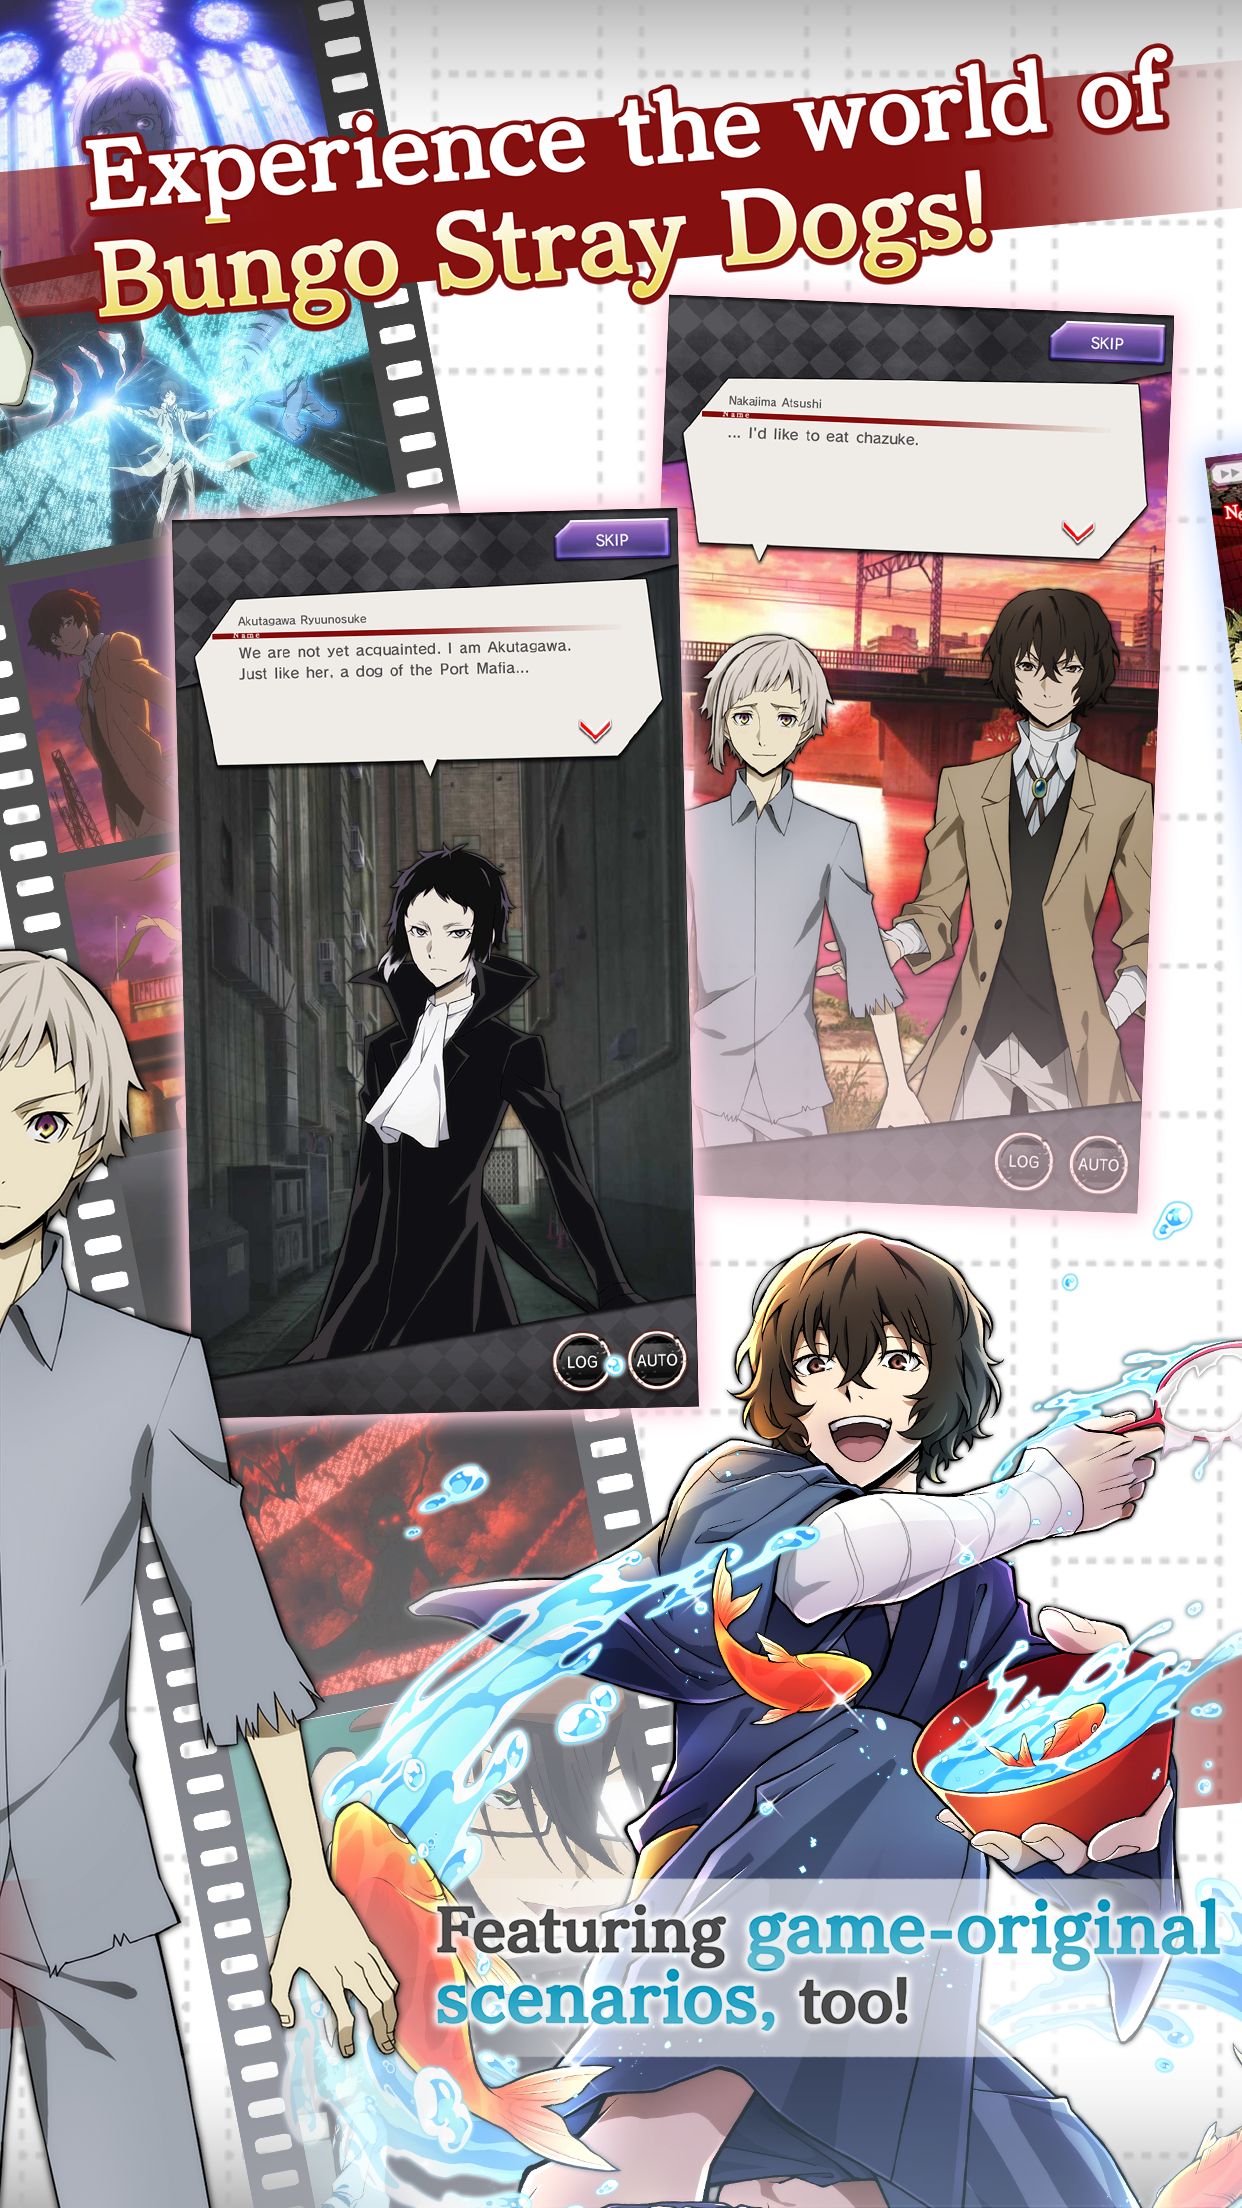 The world of Bungo Stray Dogs